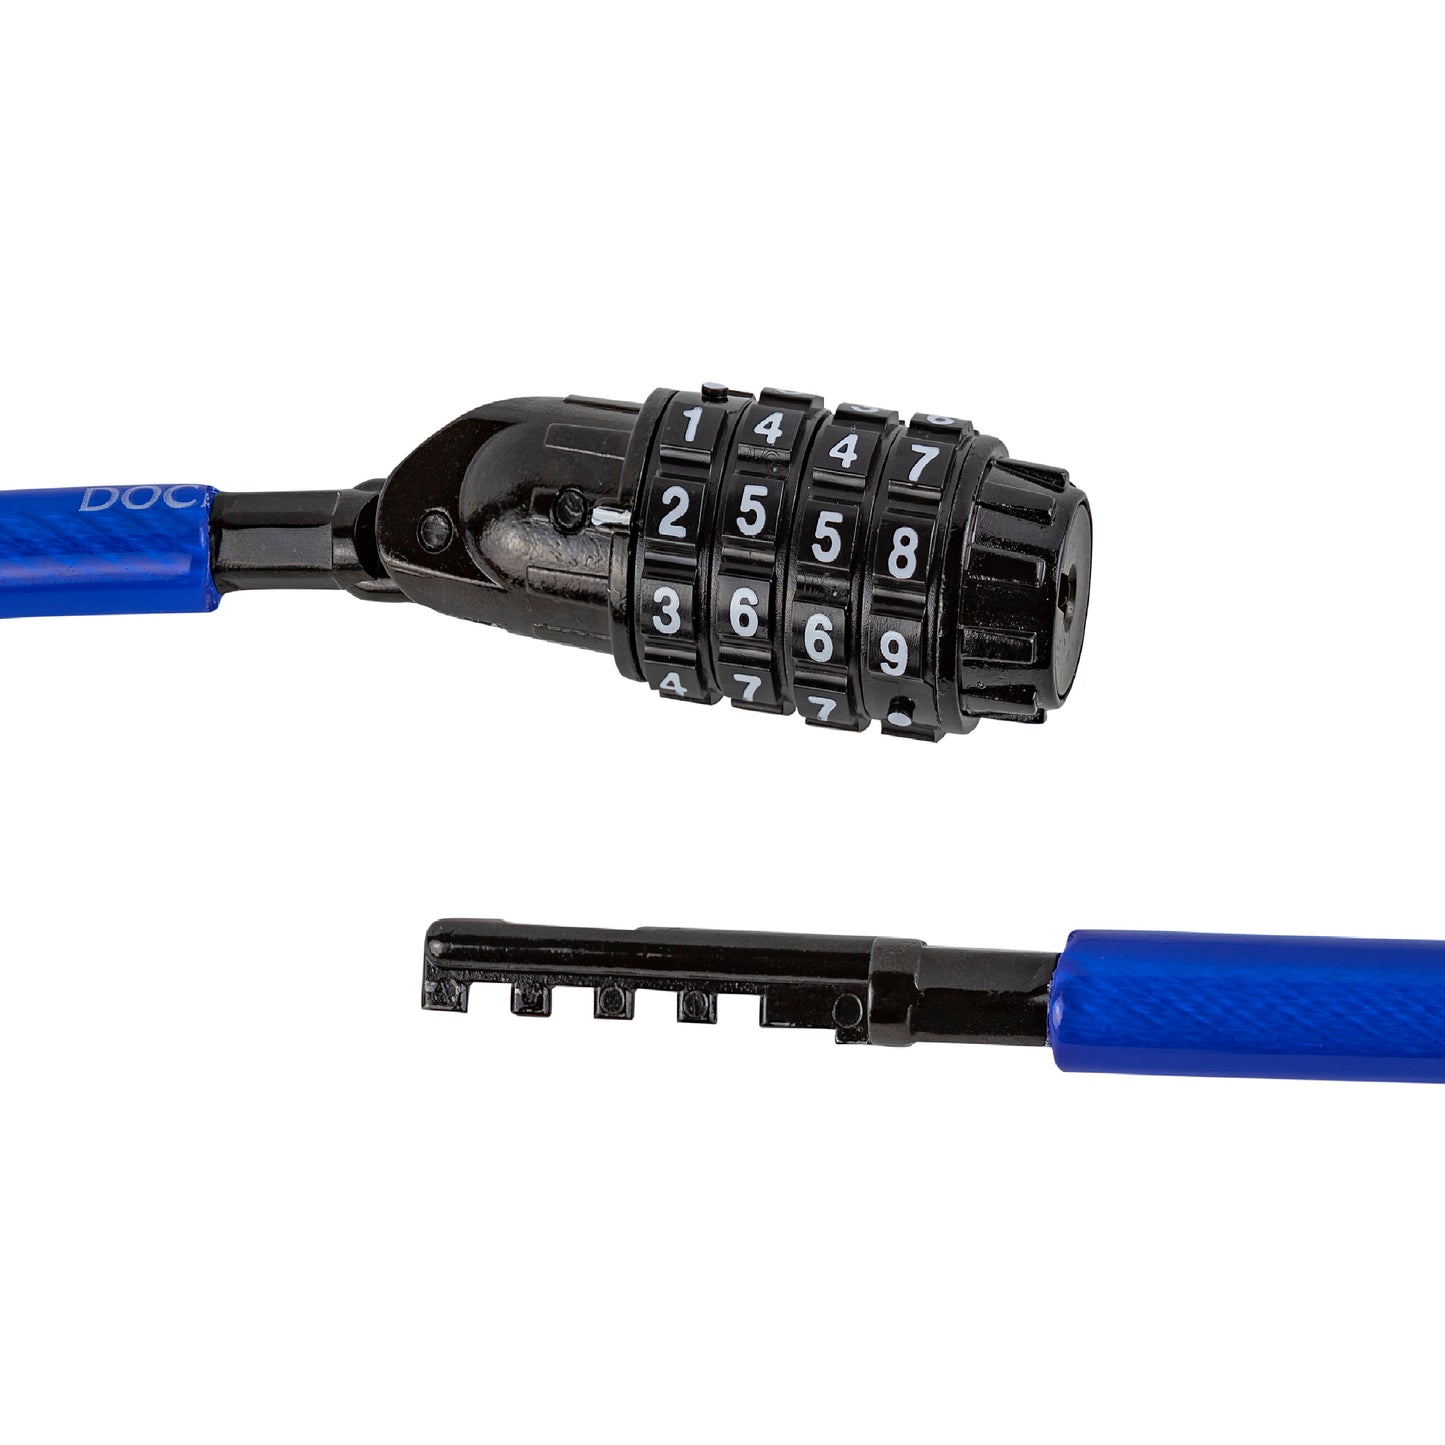 DocksLocks® Anti-Theft Weatherproof Coiled Security Cable with Re-settable Combination Lock (5', 10', 15', 20' or 25')